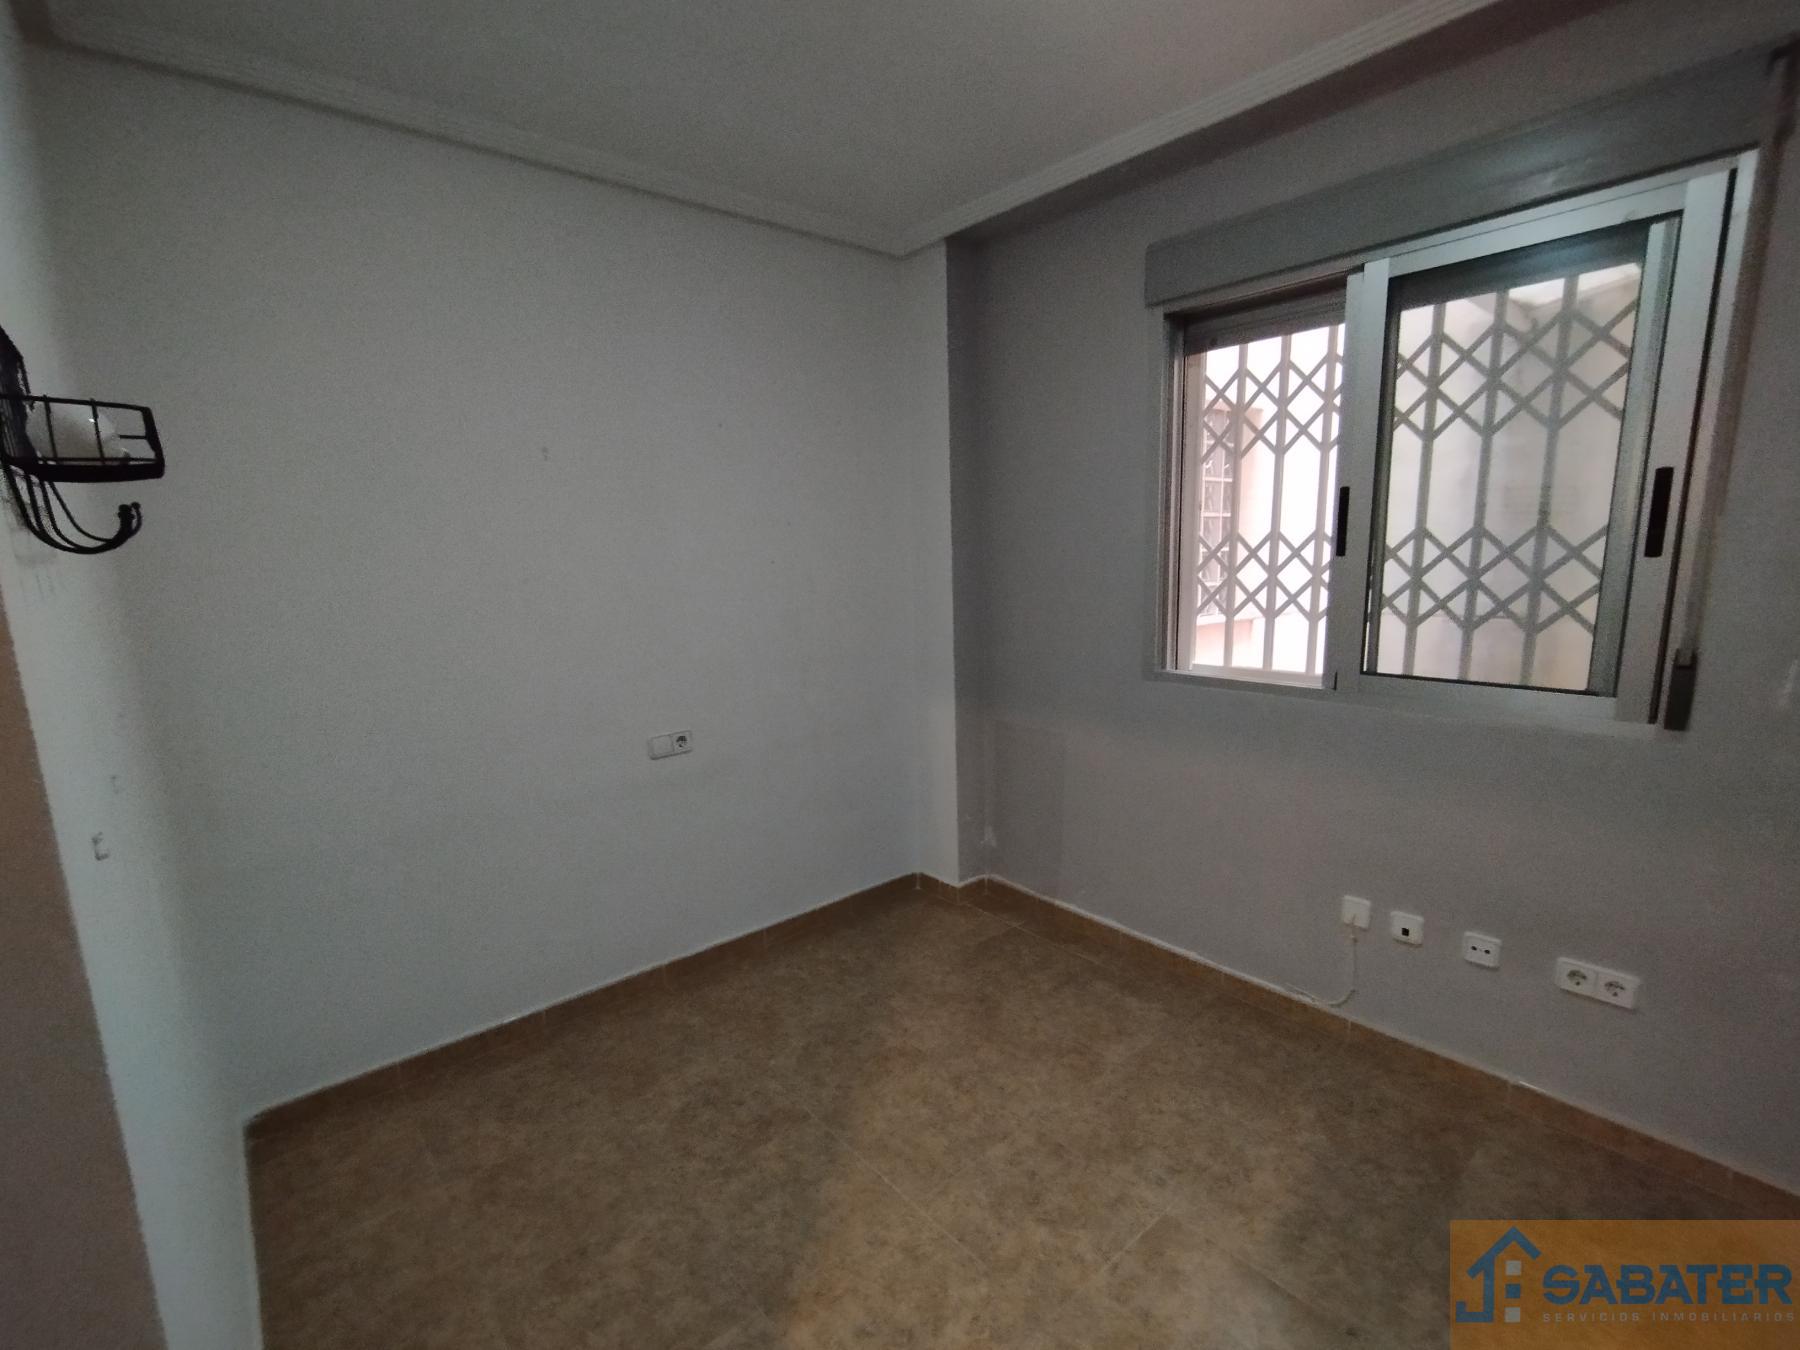 For sale of apartment in Casillas